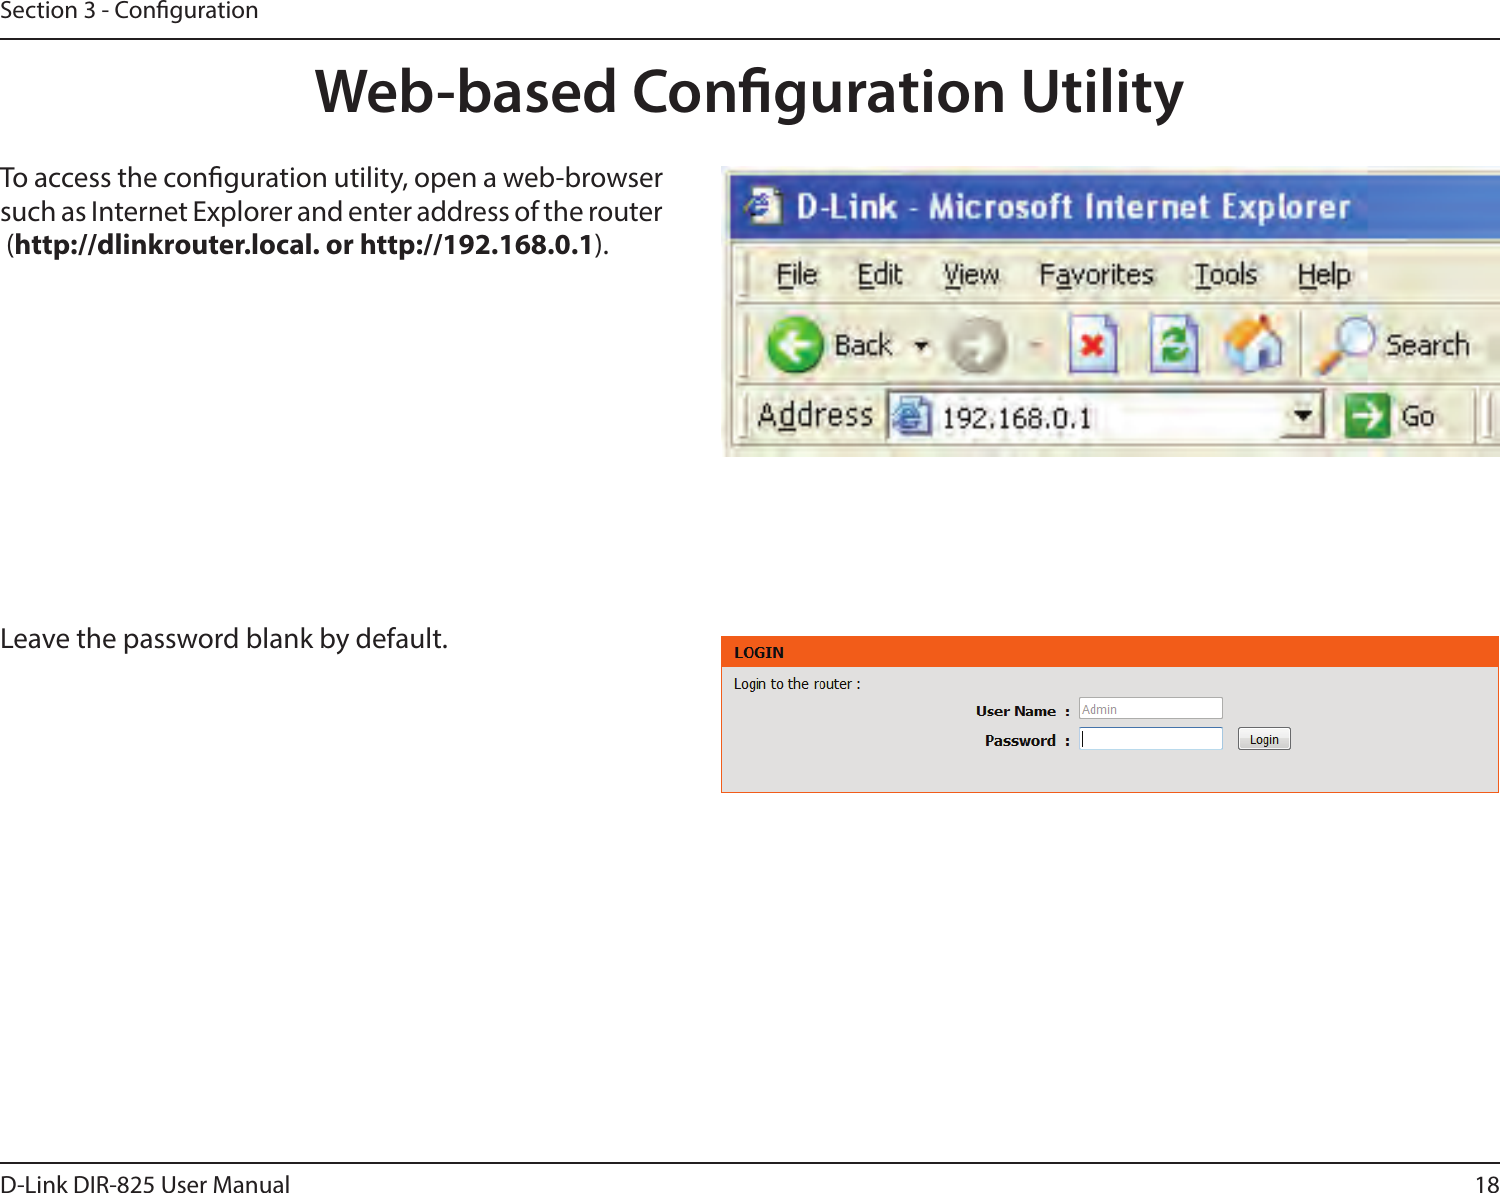 18D-Link DIR-825 User ManualSection 3 - CongurationWeb-based Conguration UtilityLeave the password blank by default.To access the conguration utility, open a web-browser such as Internet Explorer and enter address of the router (http://dlinkrouter.local. or http://192.168.0.1).